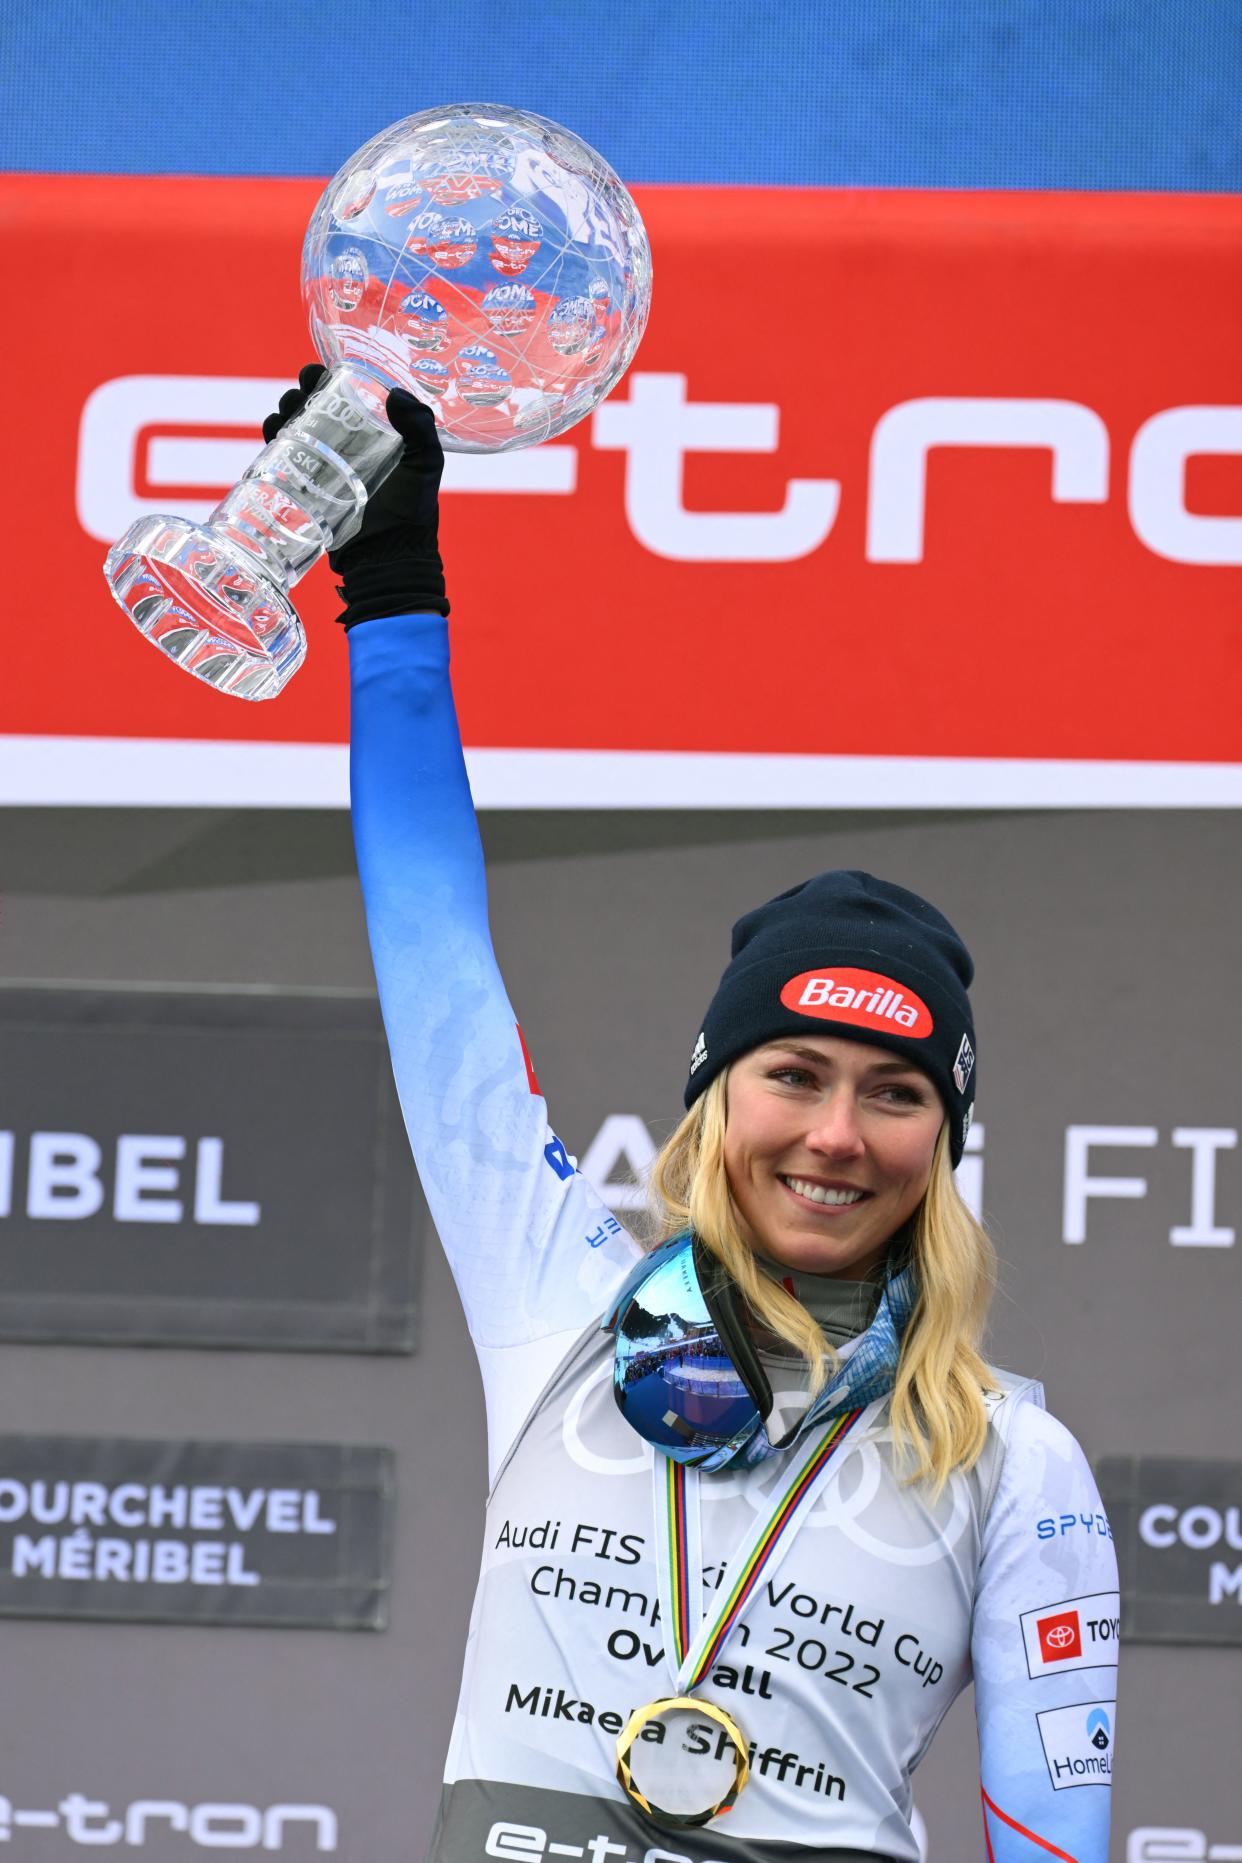 General overall FIS Alpine ski winner US ' Mikaela Shiffrin holds the crystal globe on podium during the FIS Alpine Ski World Cup finals 2021/2022 in Meribel, French Alps, on March 20, 2022. (Photo by NICOLAS TUCAT / AFP) (Photo by NICOLAS TUCAT/AFP via Getty Images)